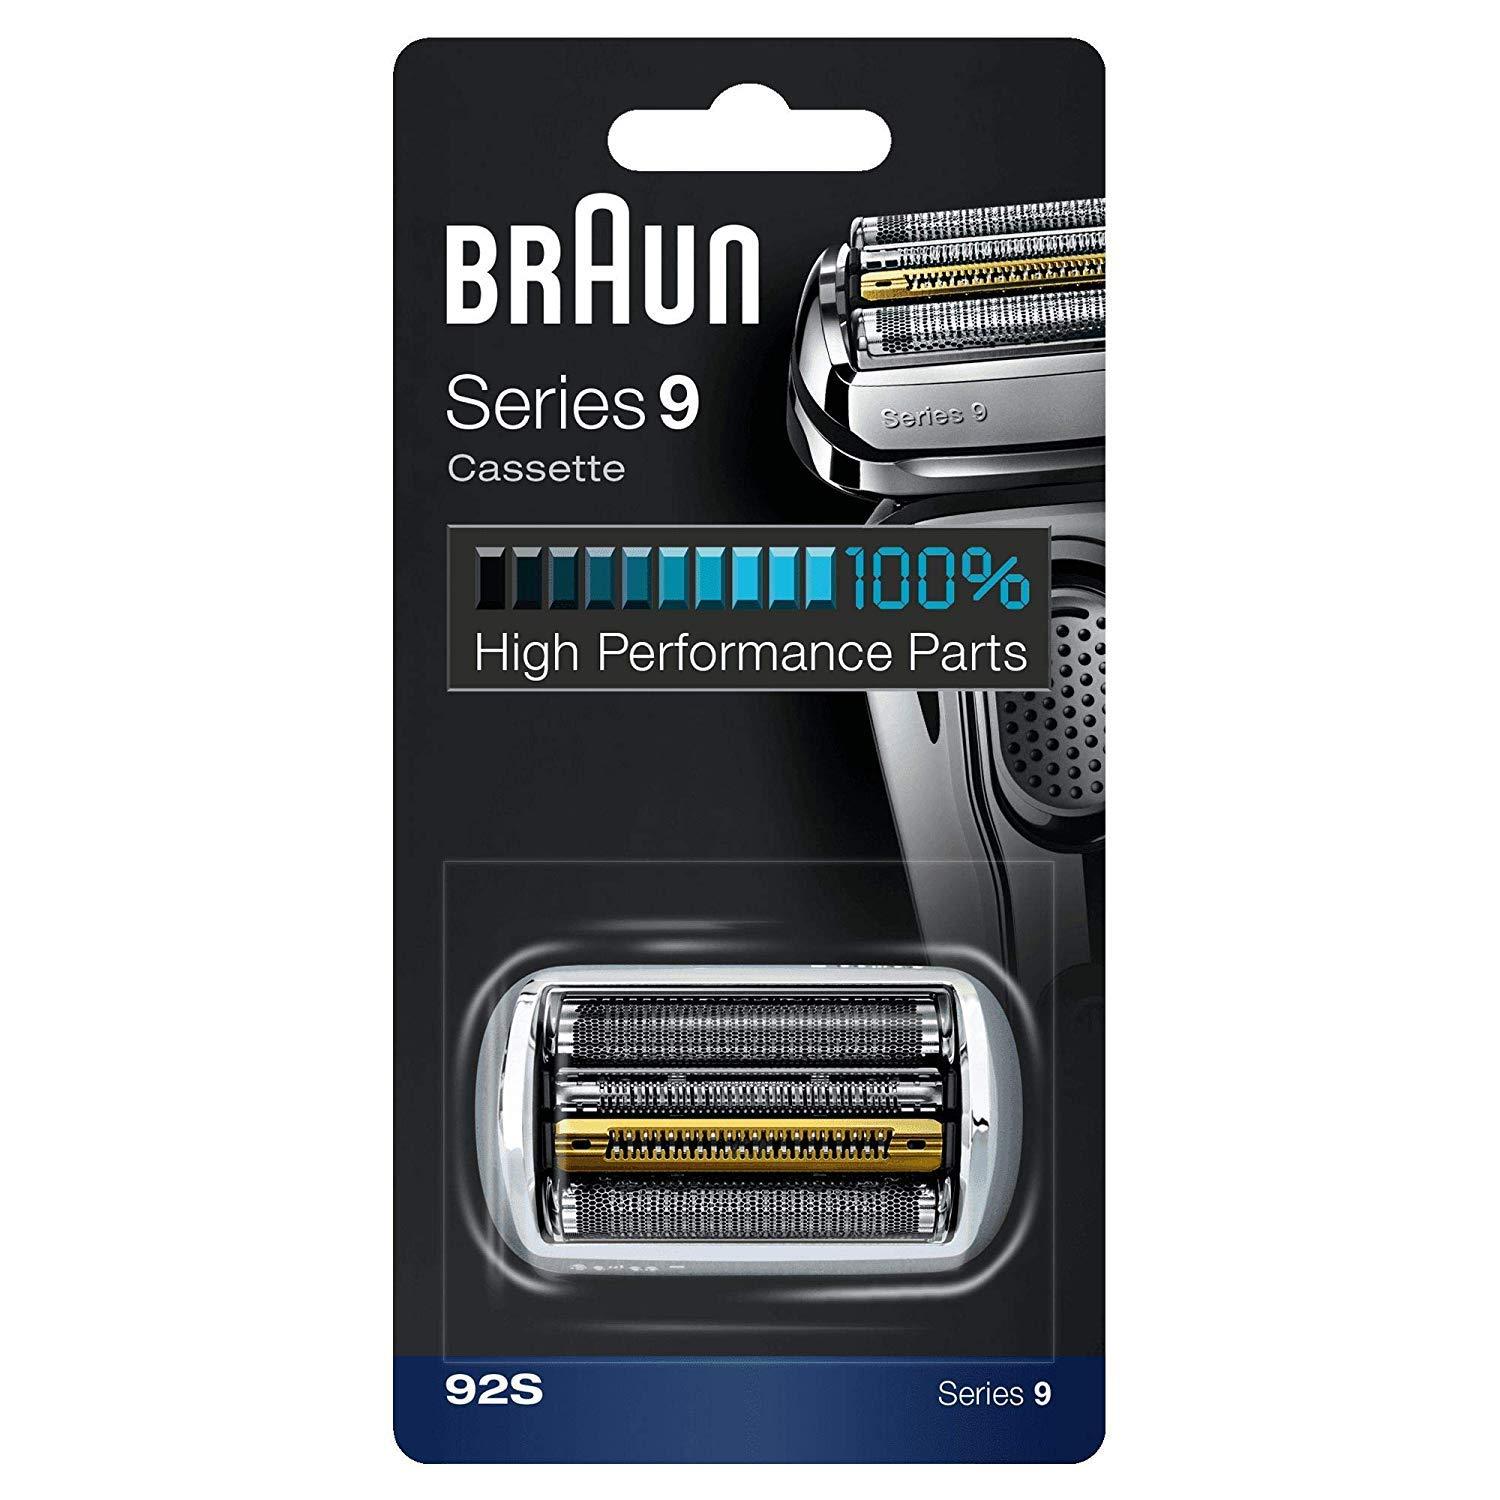 Braun Series 9 92S Foil and Cutter Replacement Head for $33.24 Shipped